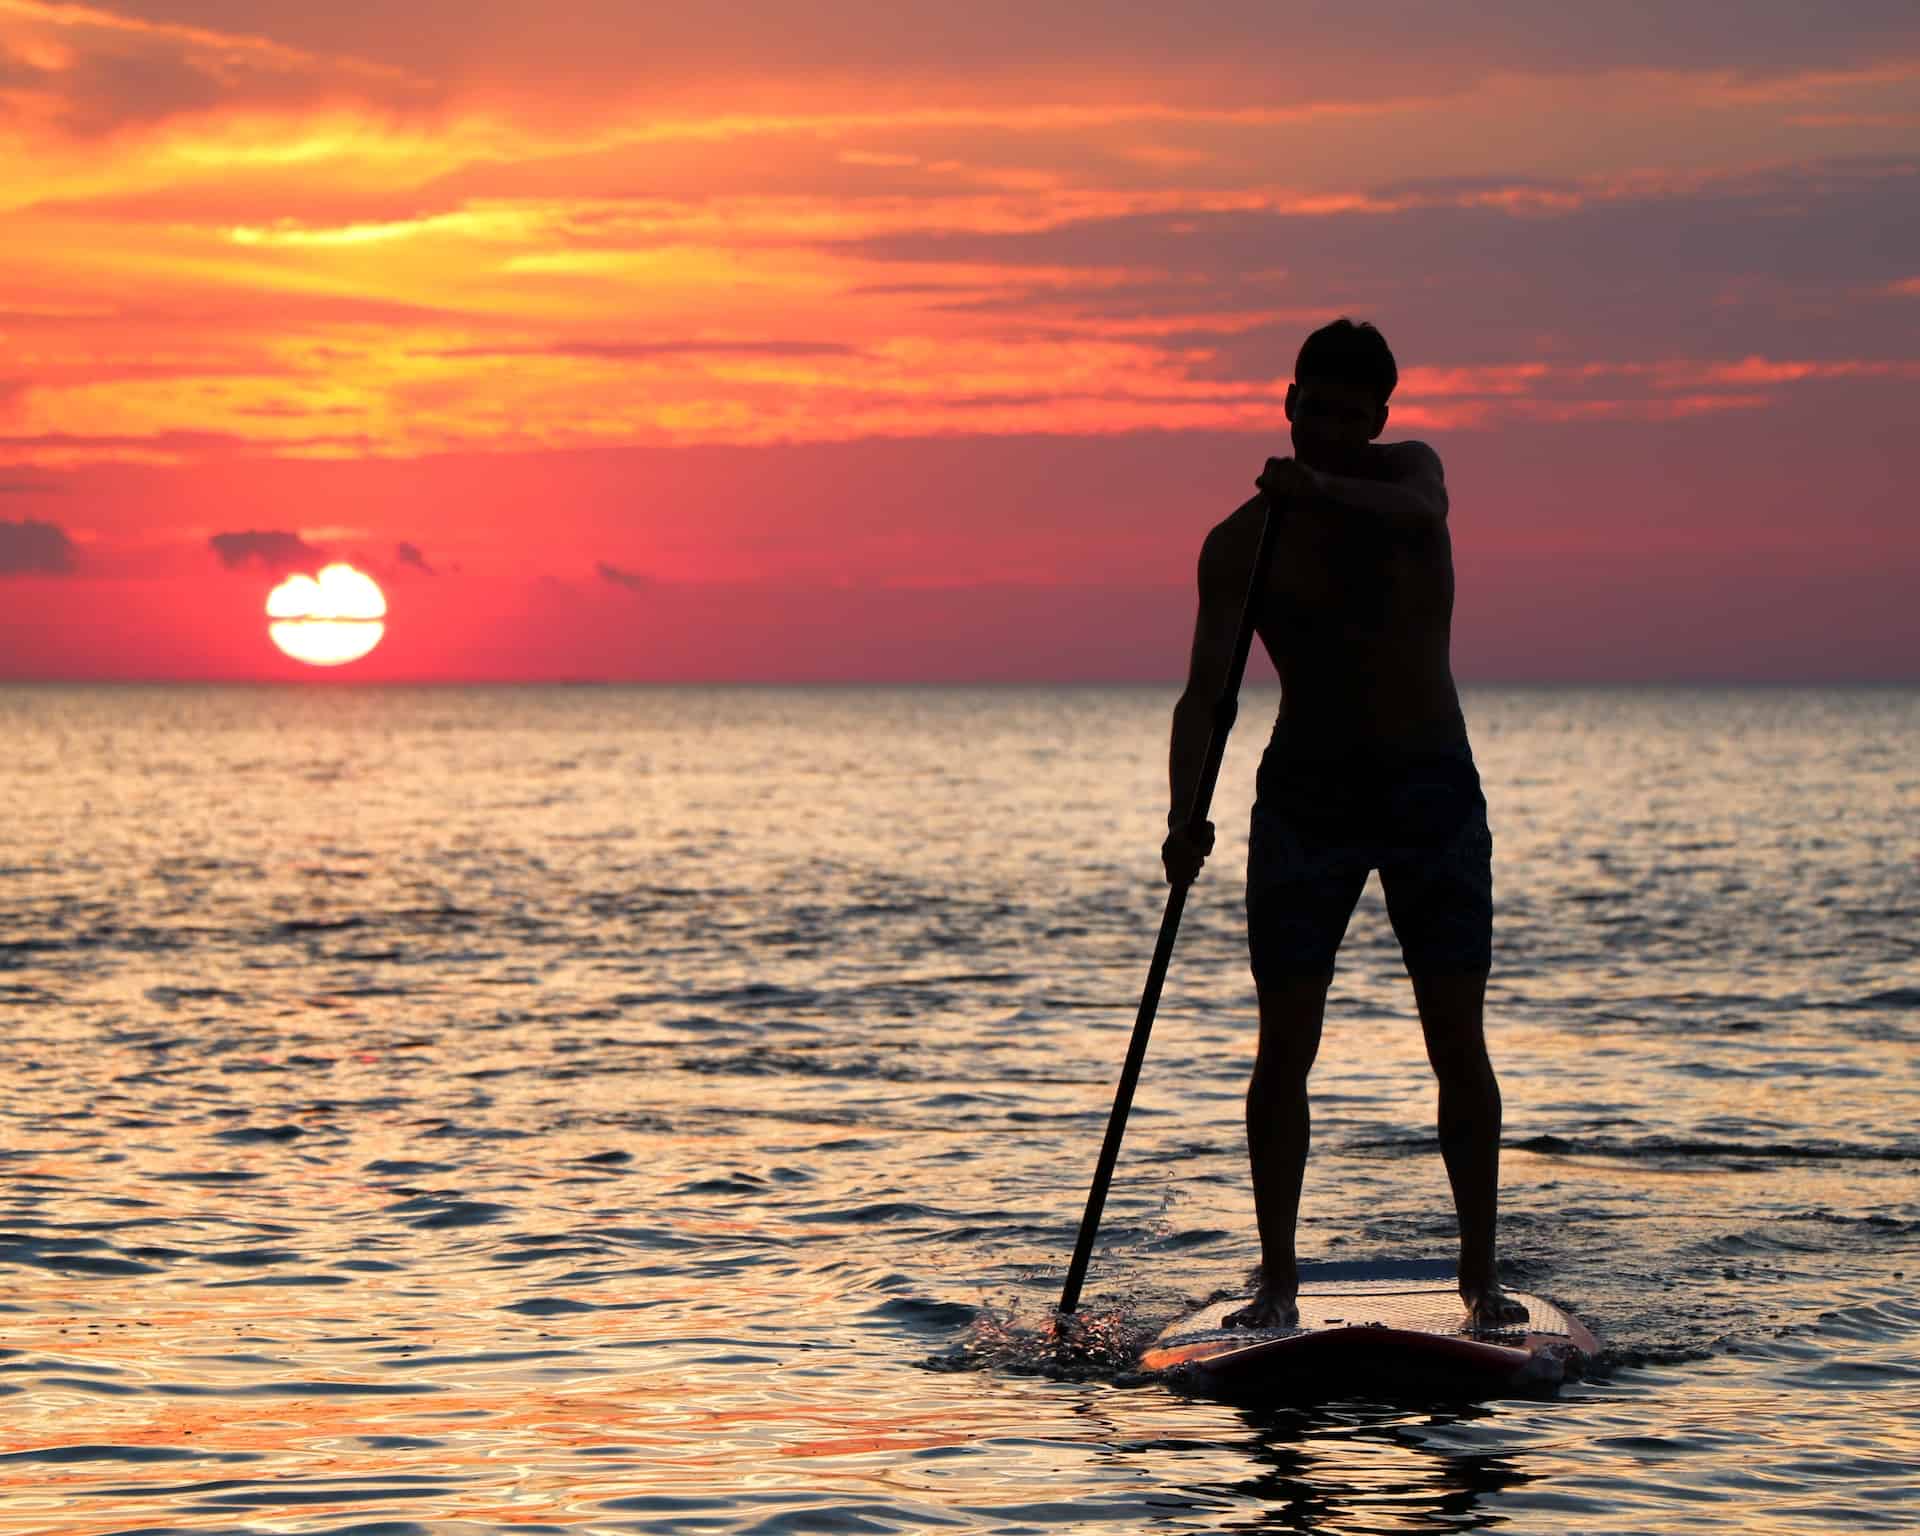 stand up paddle boarding during sunset